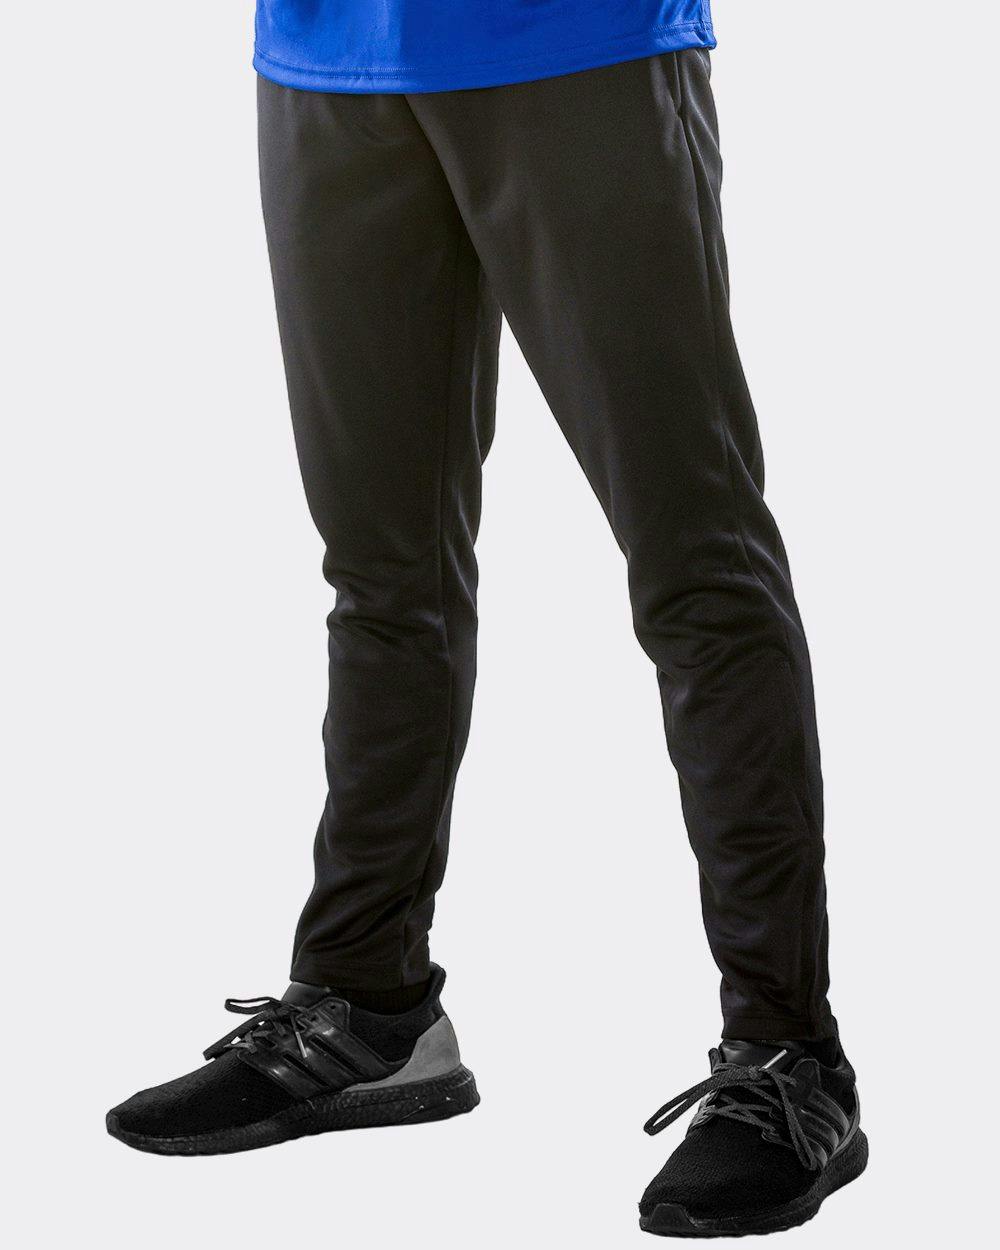 Image for Unbrushed Polyester Trainer Pants - 1575